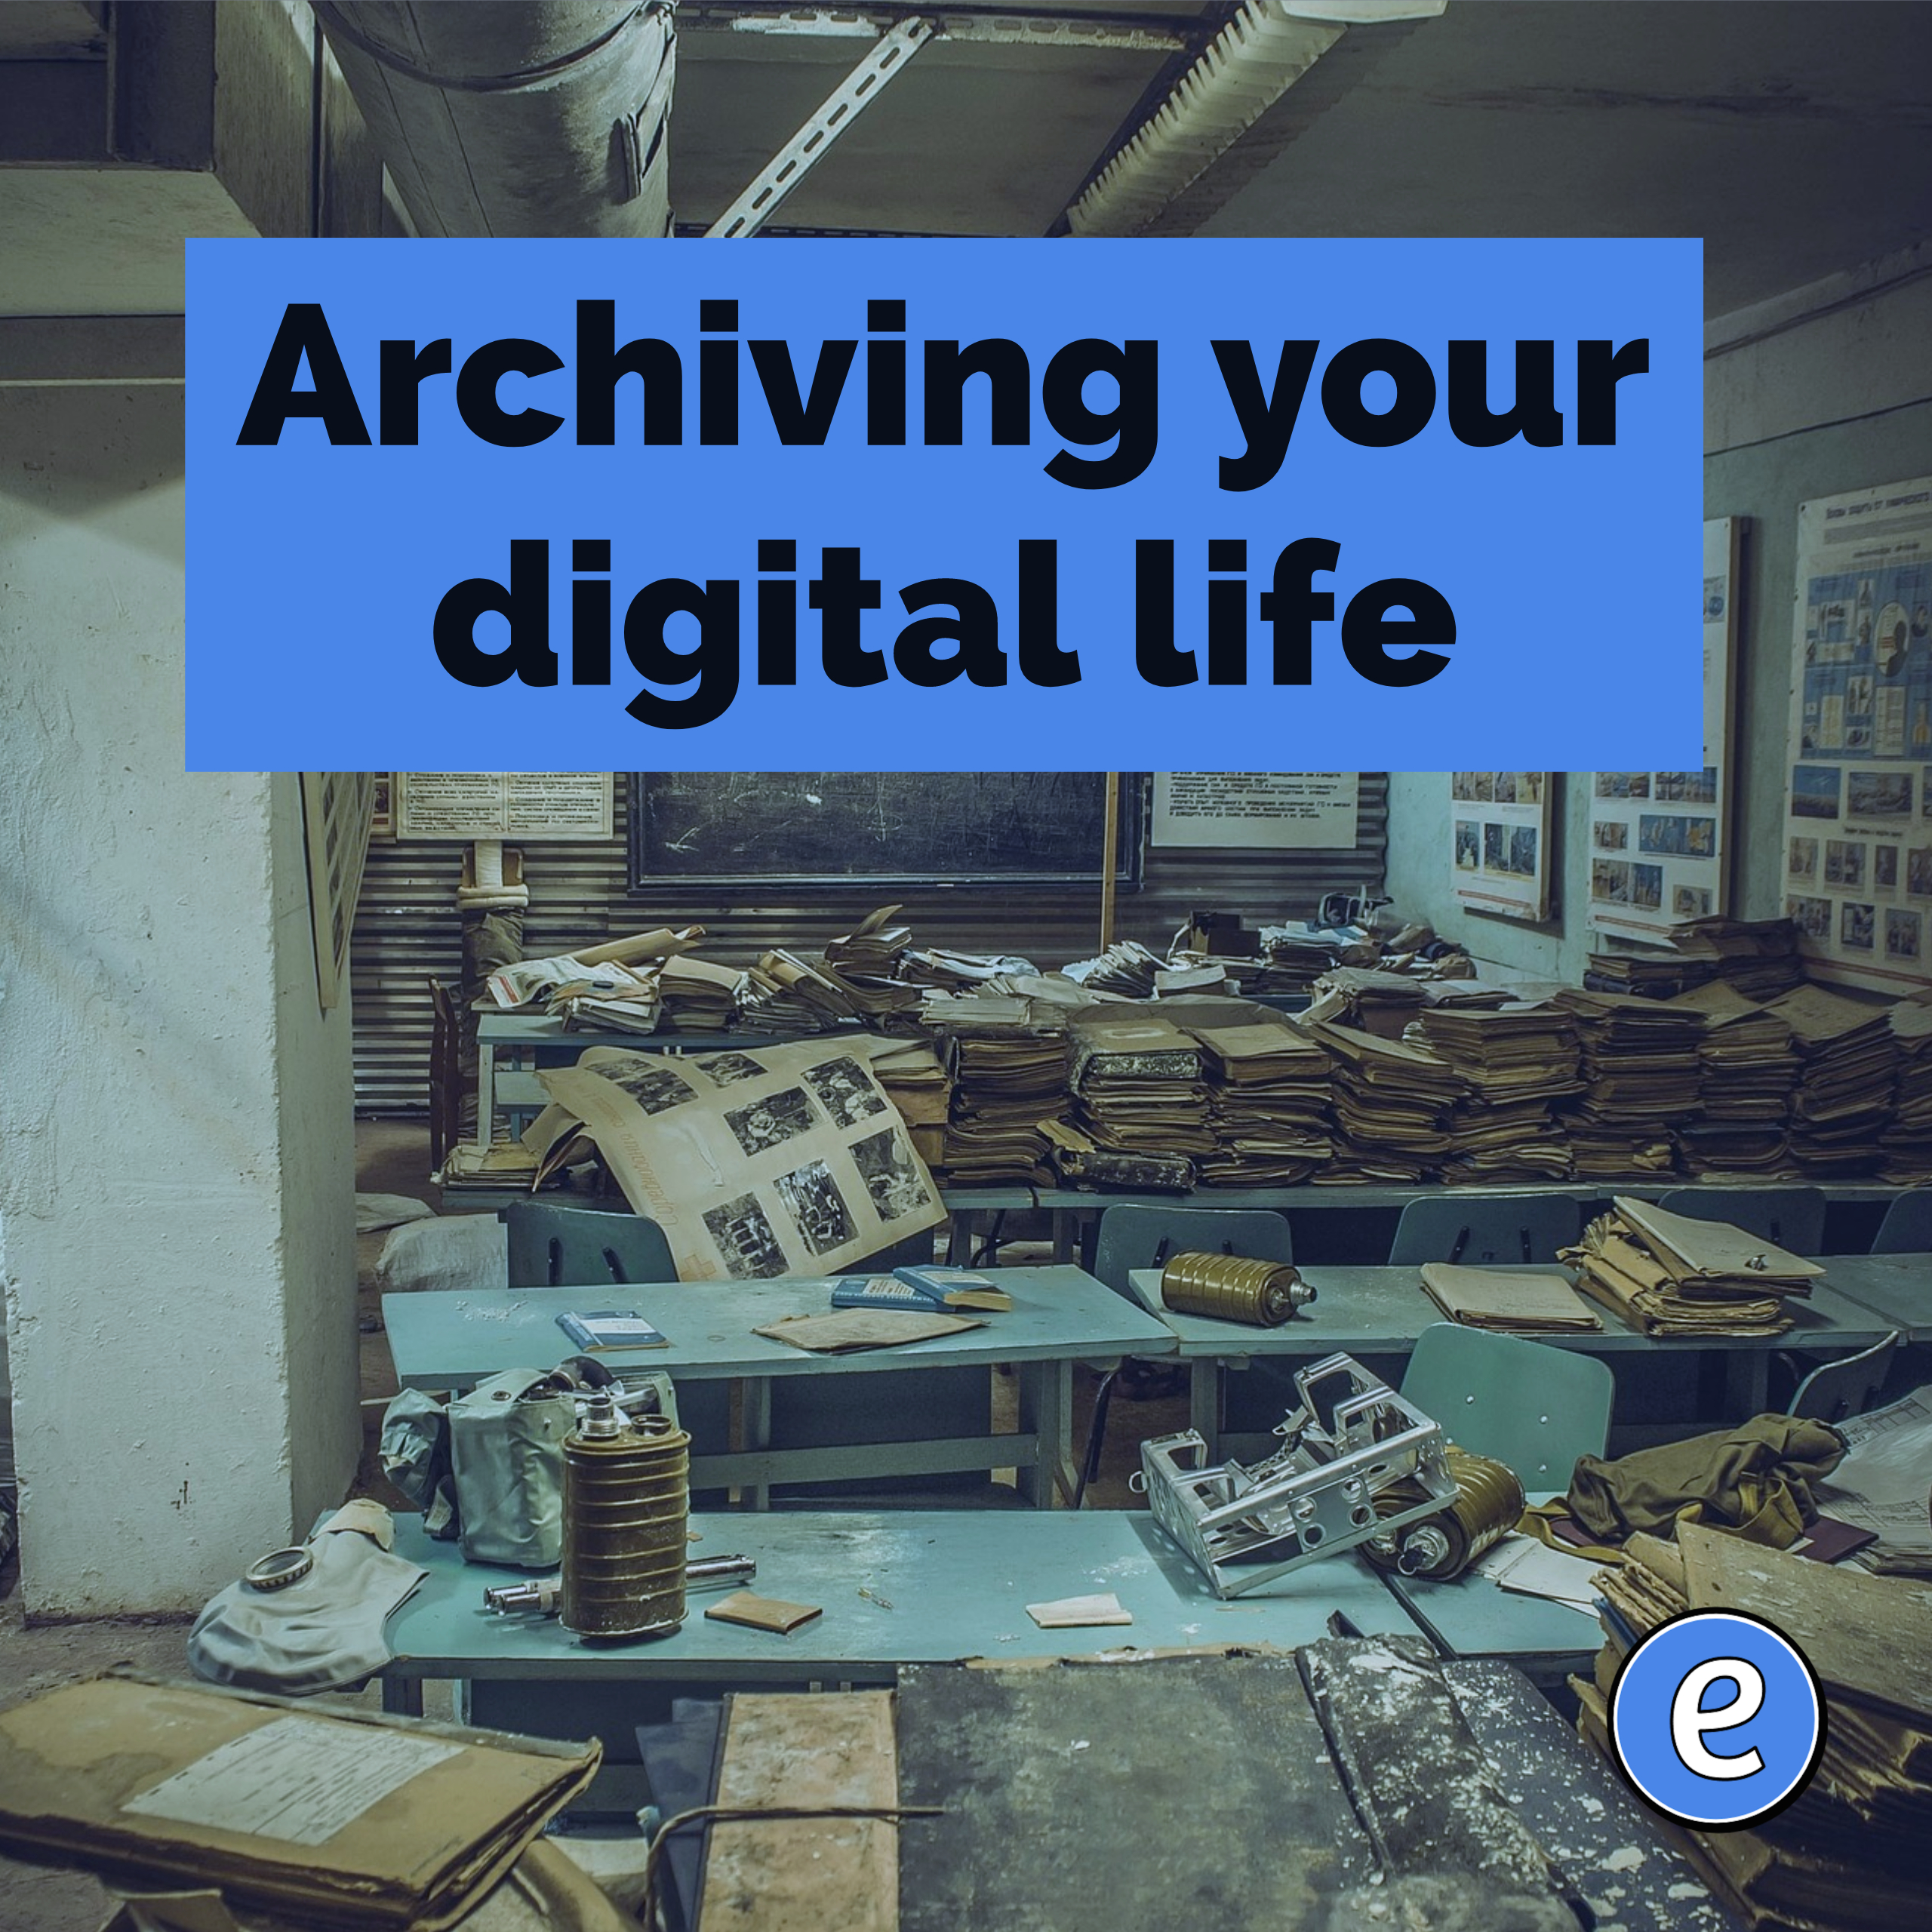 Archiving your digital life